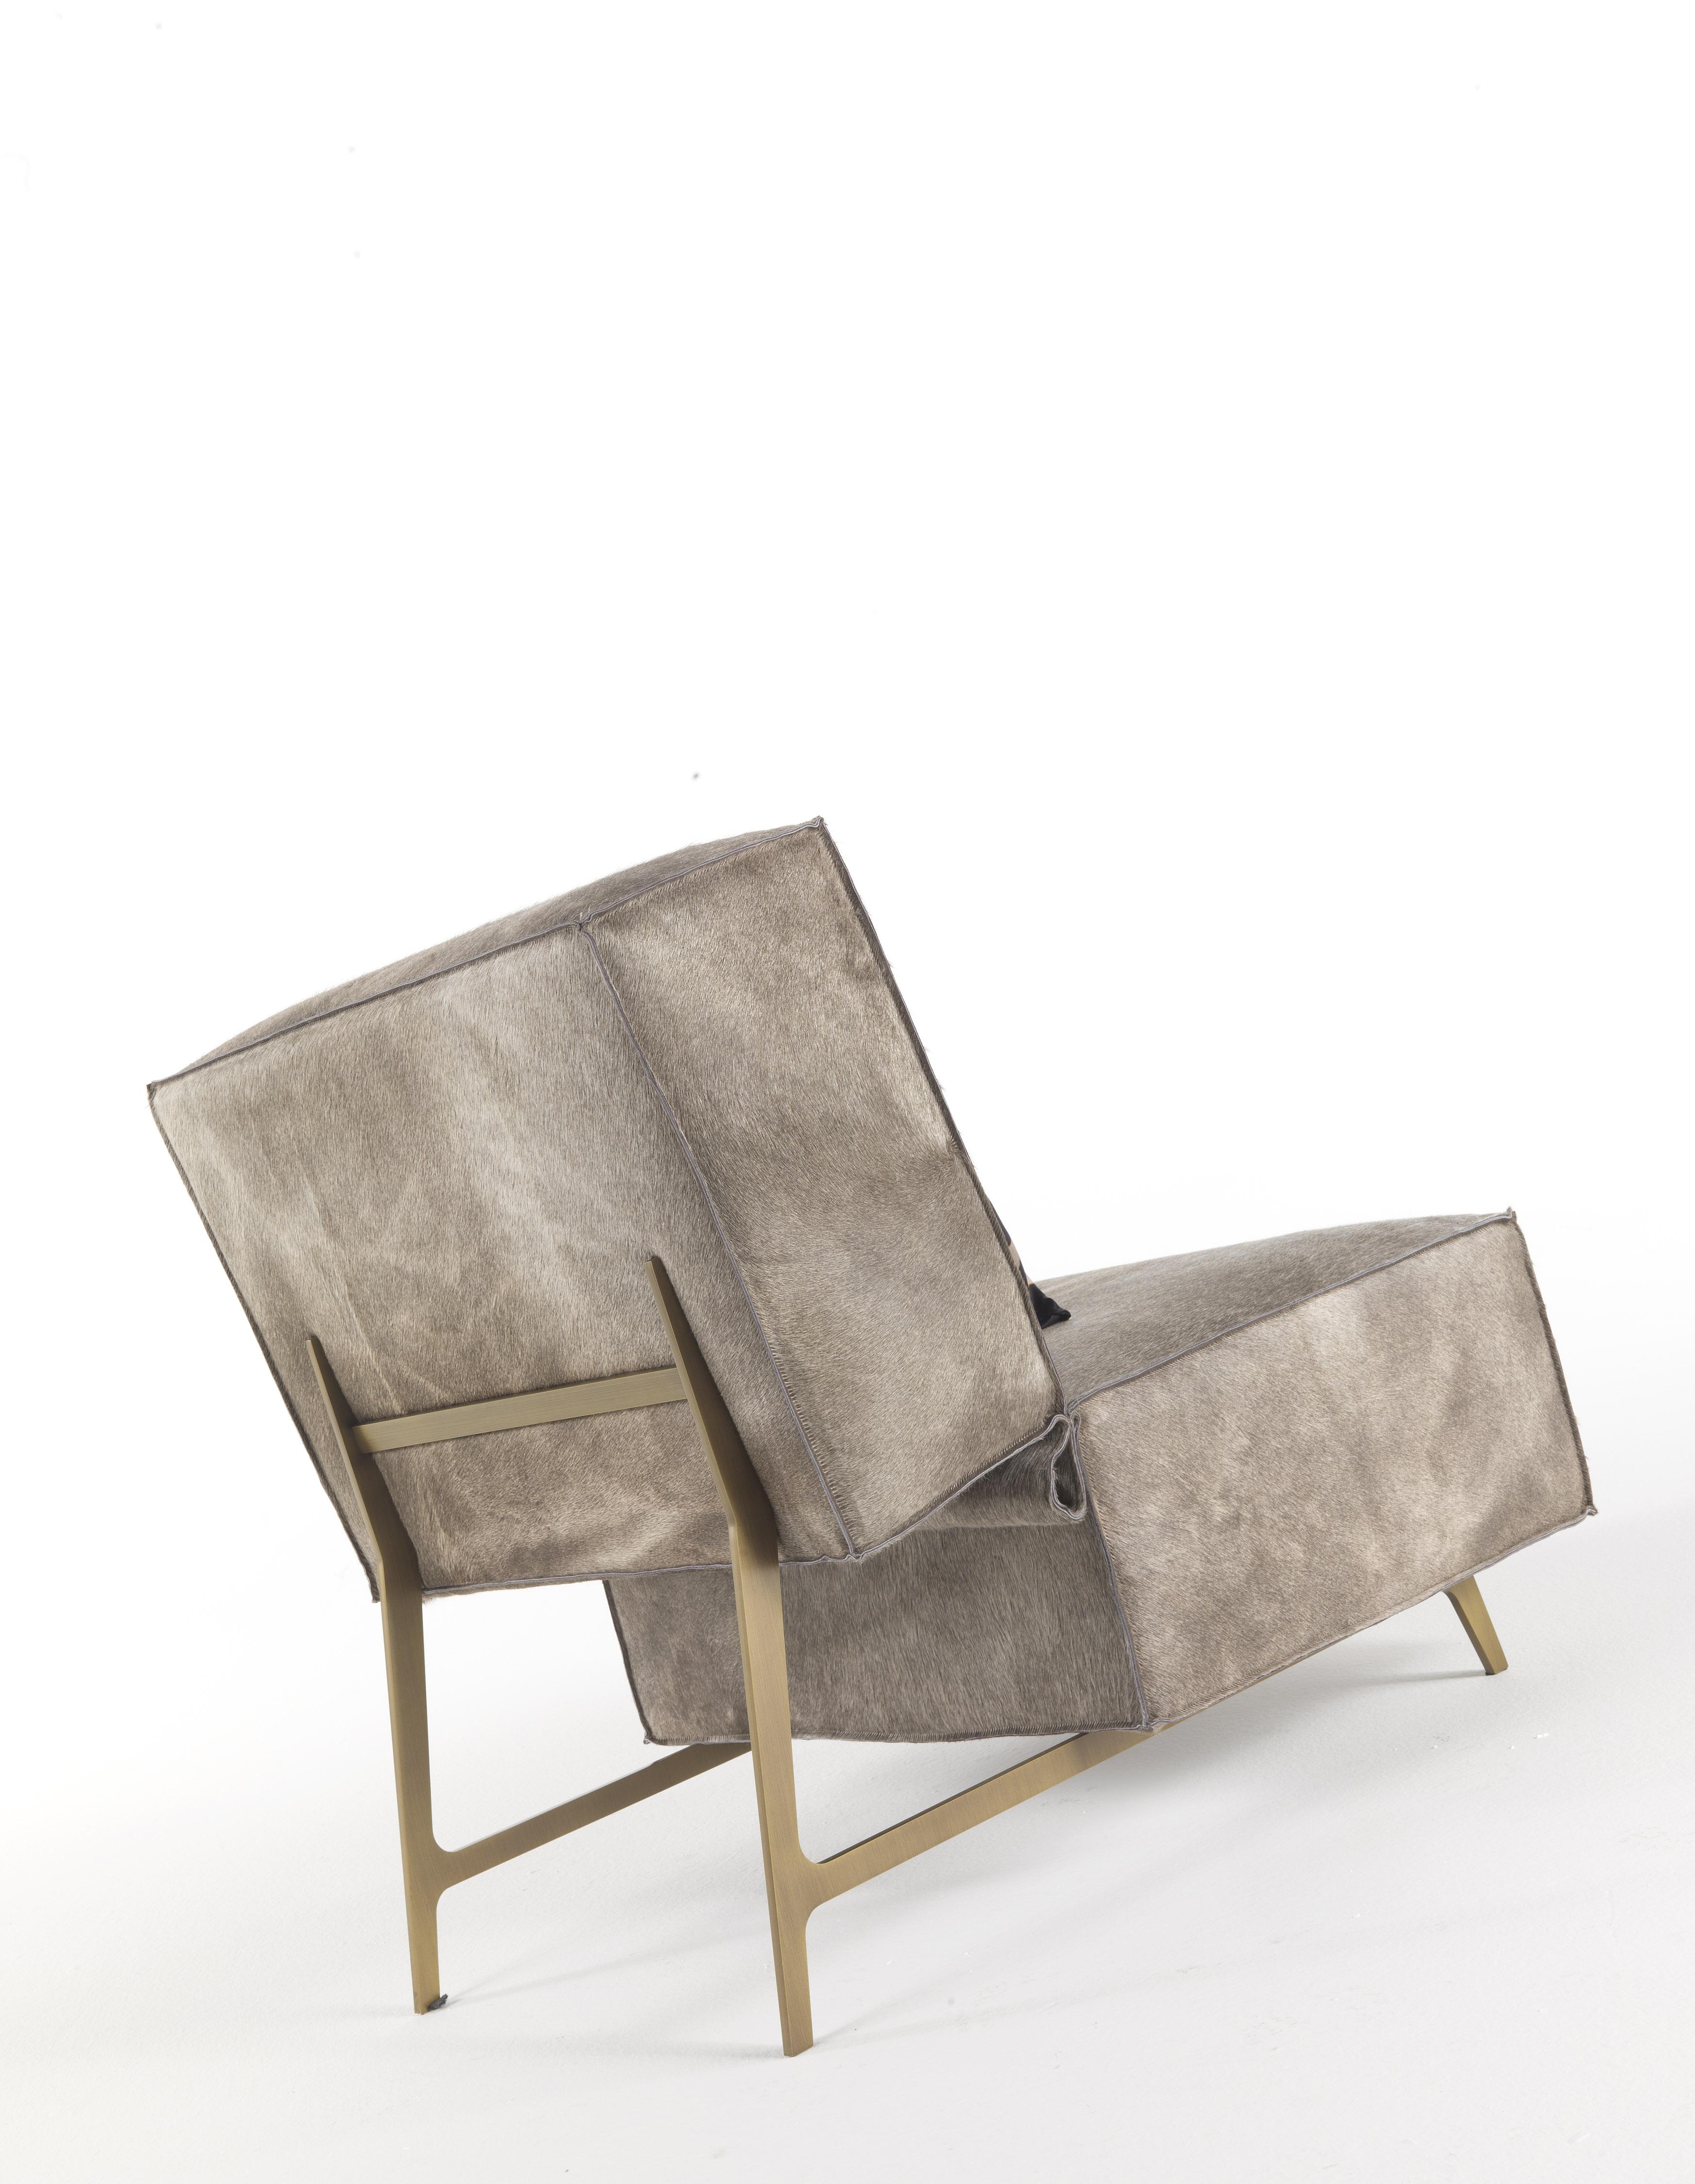 With its graceful lines and compact proportions, Davis armchair creates an intimate conversation area. This refined armchair is raised off the floor on thin bronze brushed legs for an effect of overall lightness.

Davis Armchair with structure in